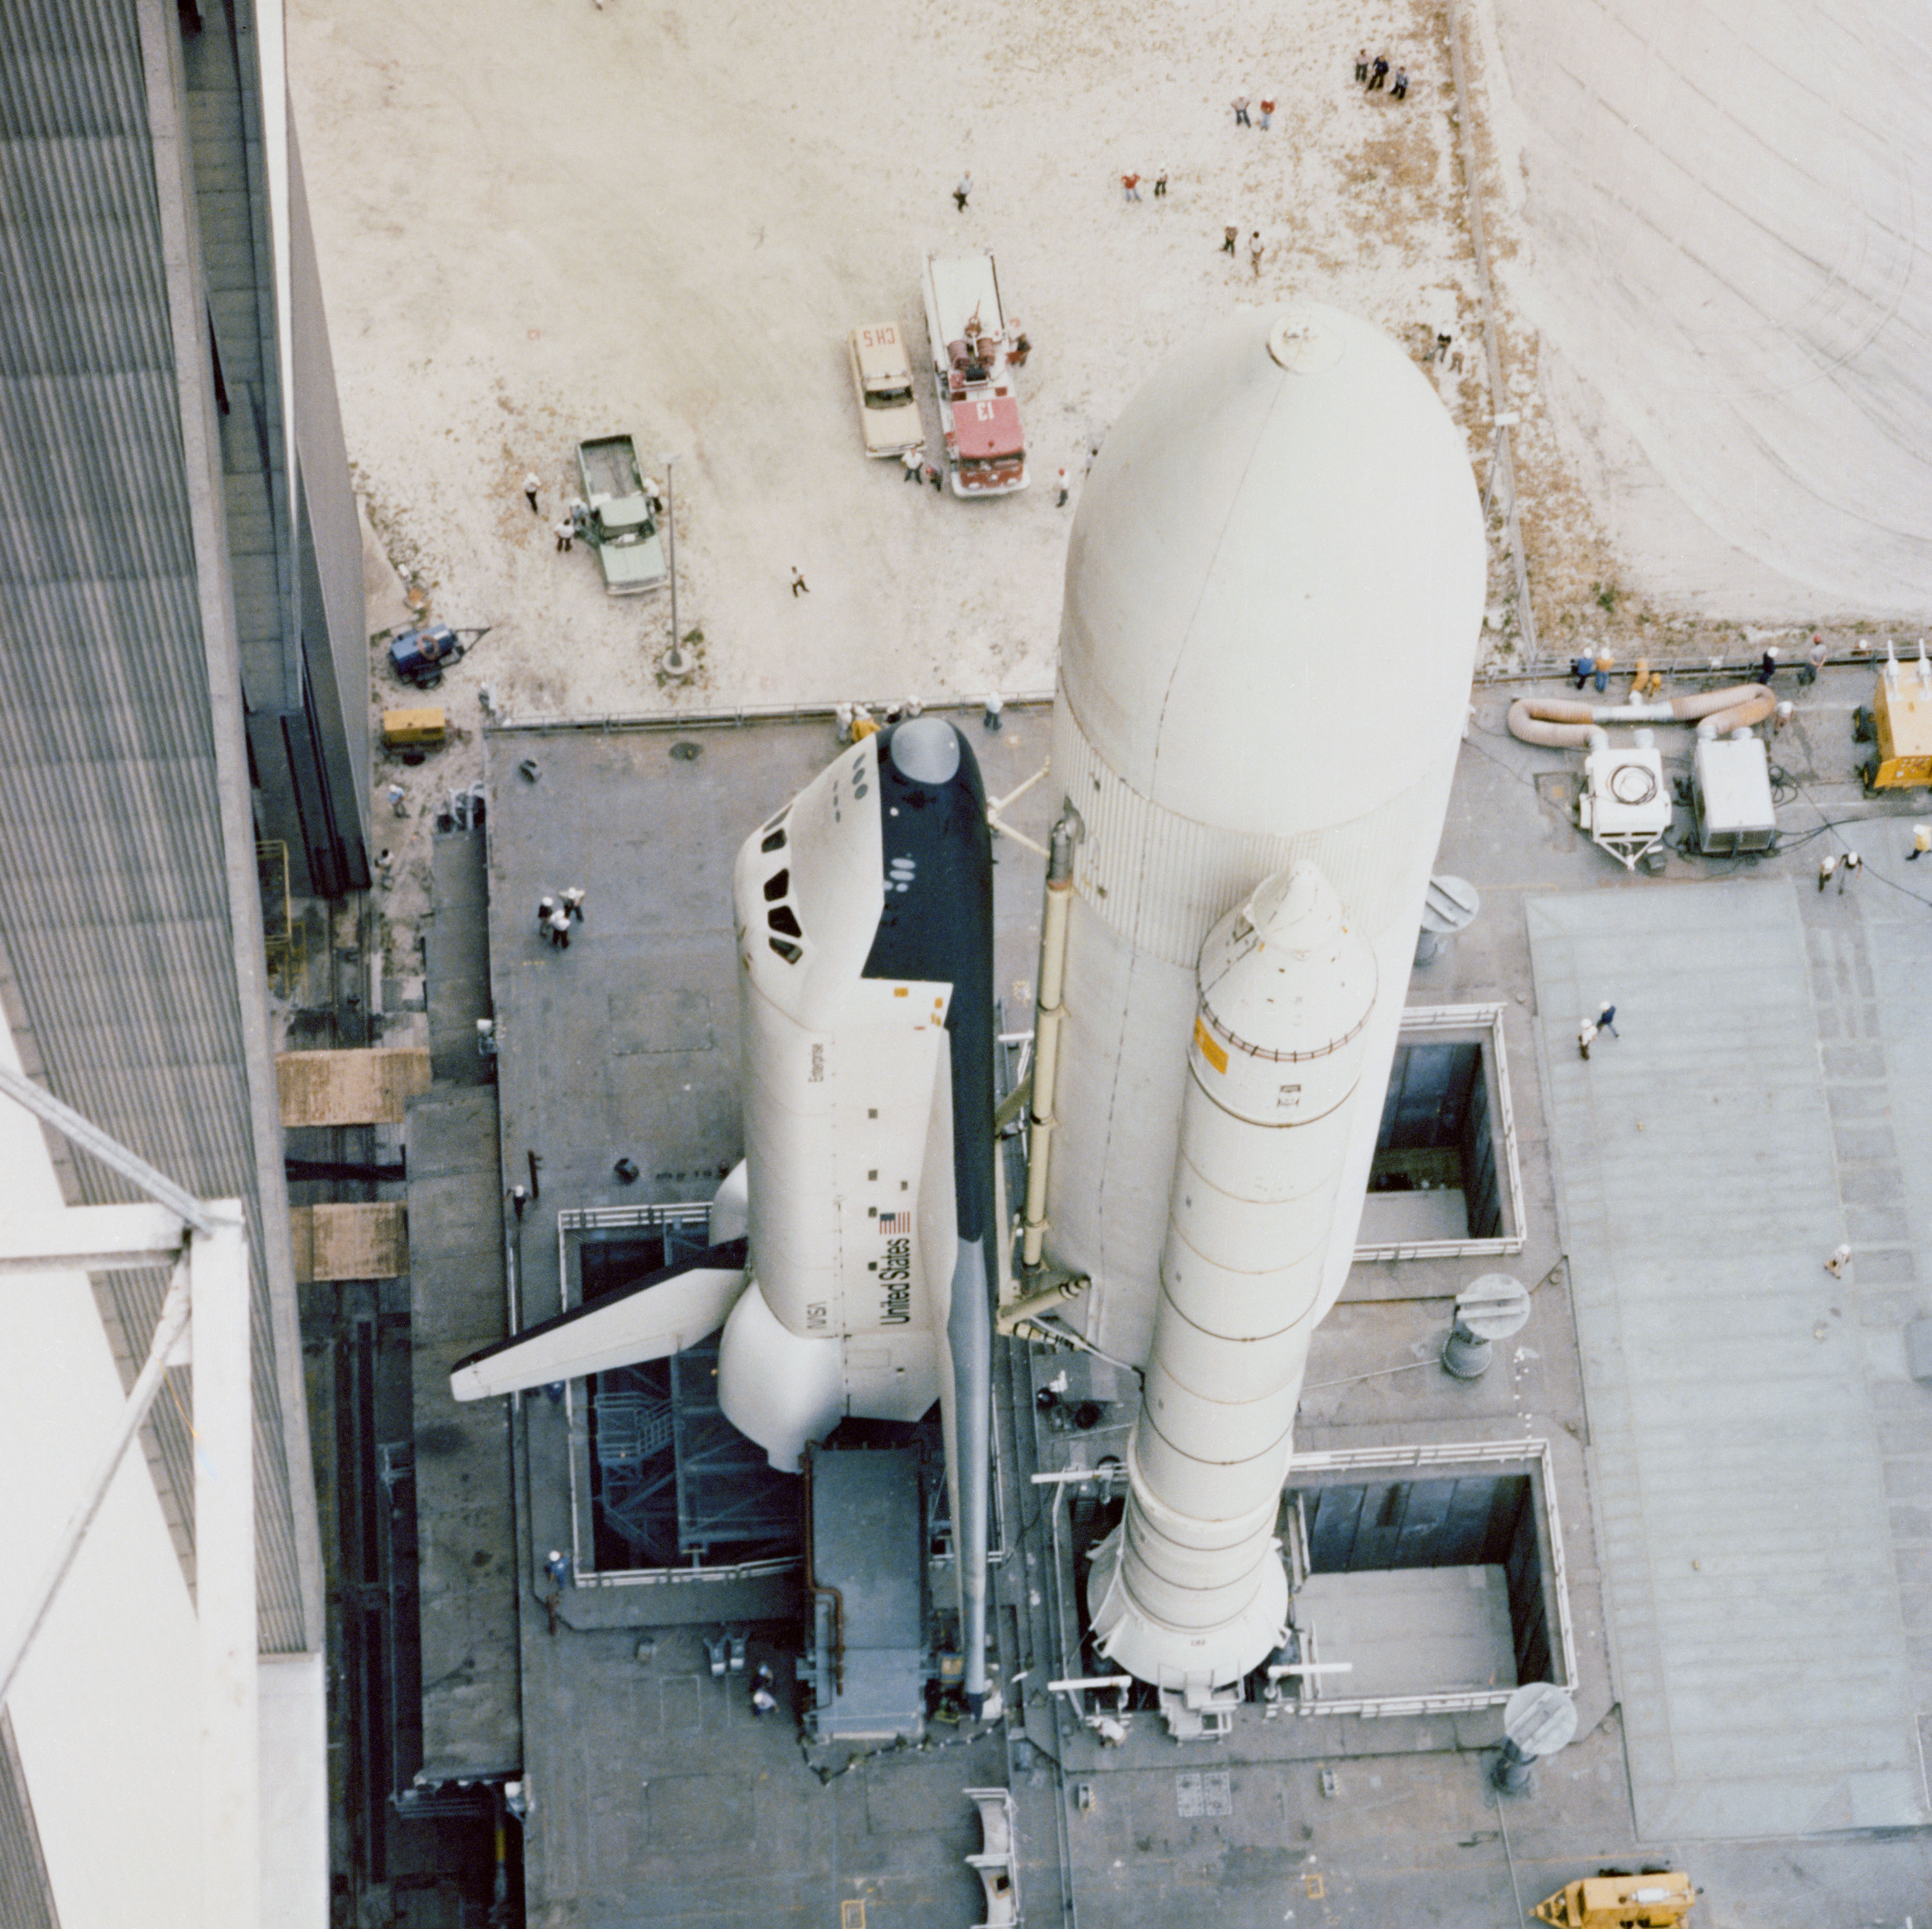 Enterprise exiting the Vehicle Assembly Building